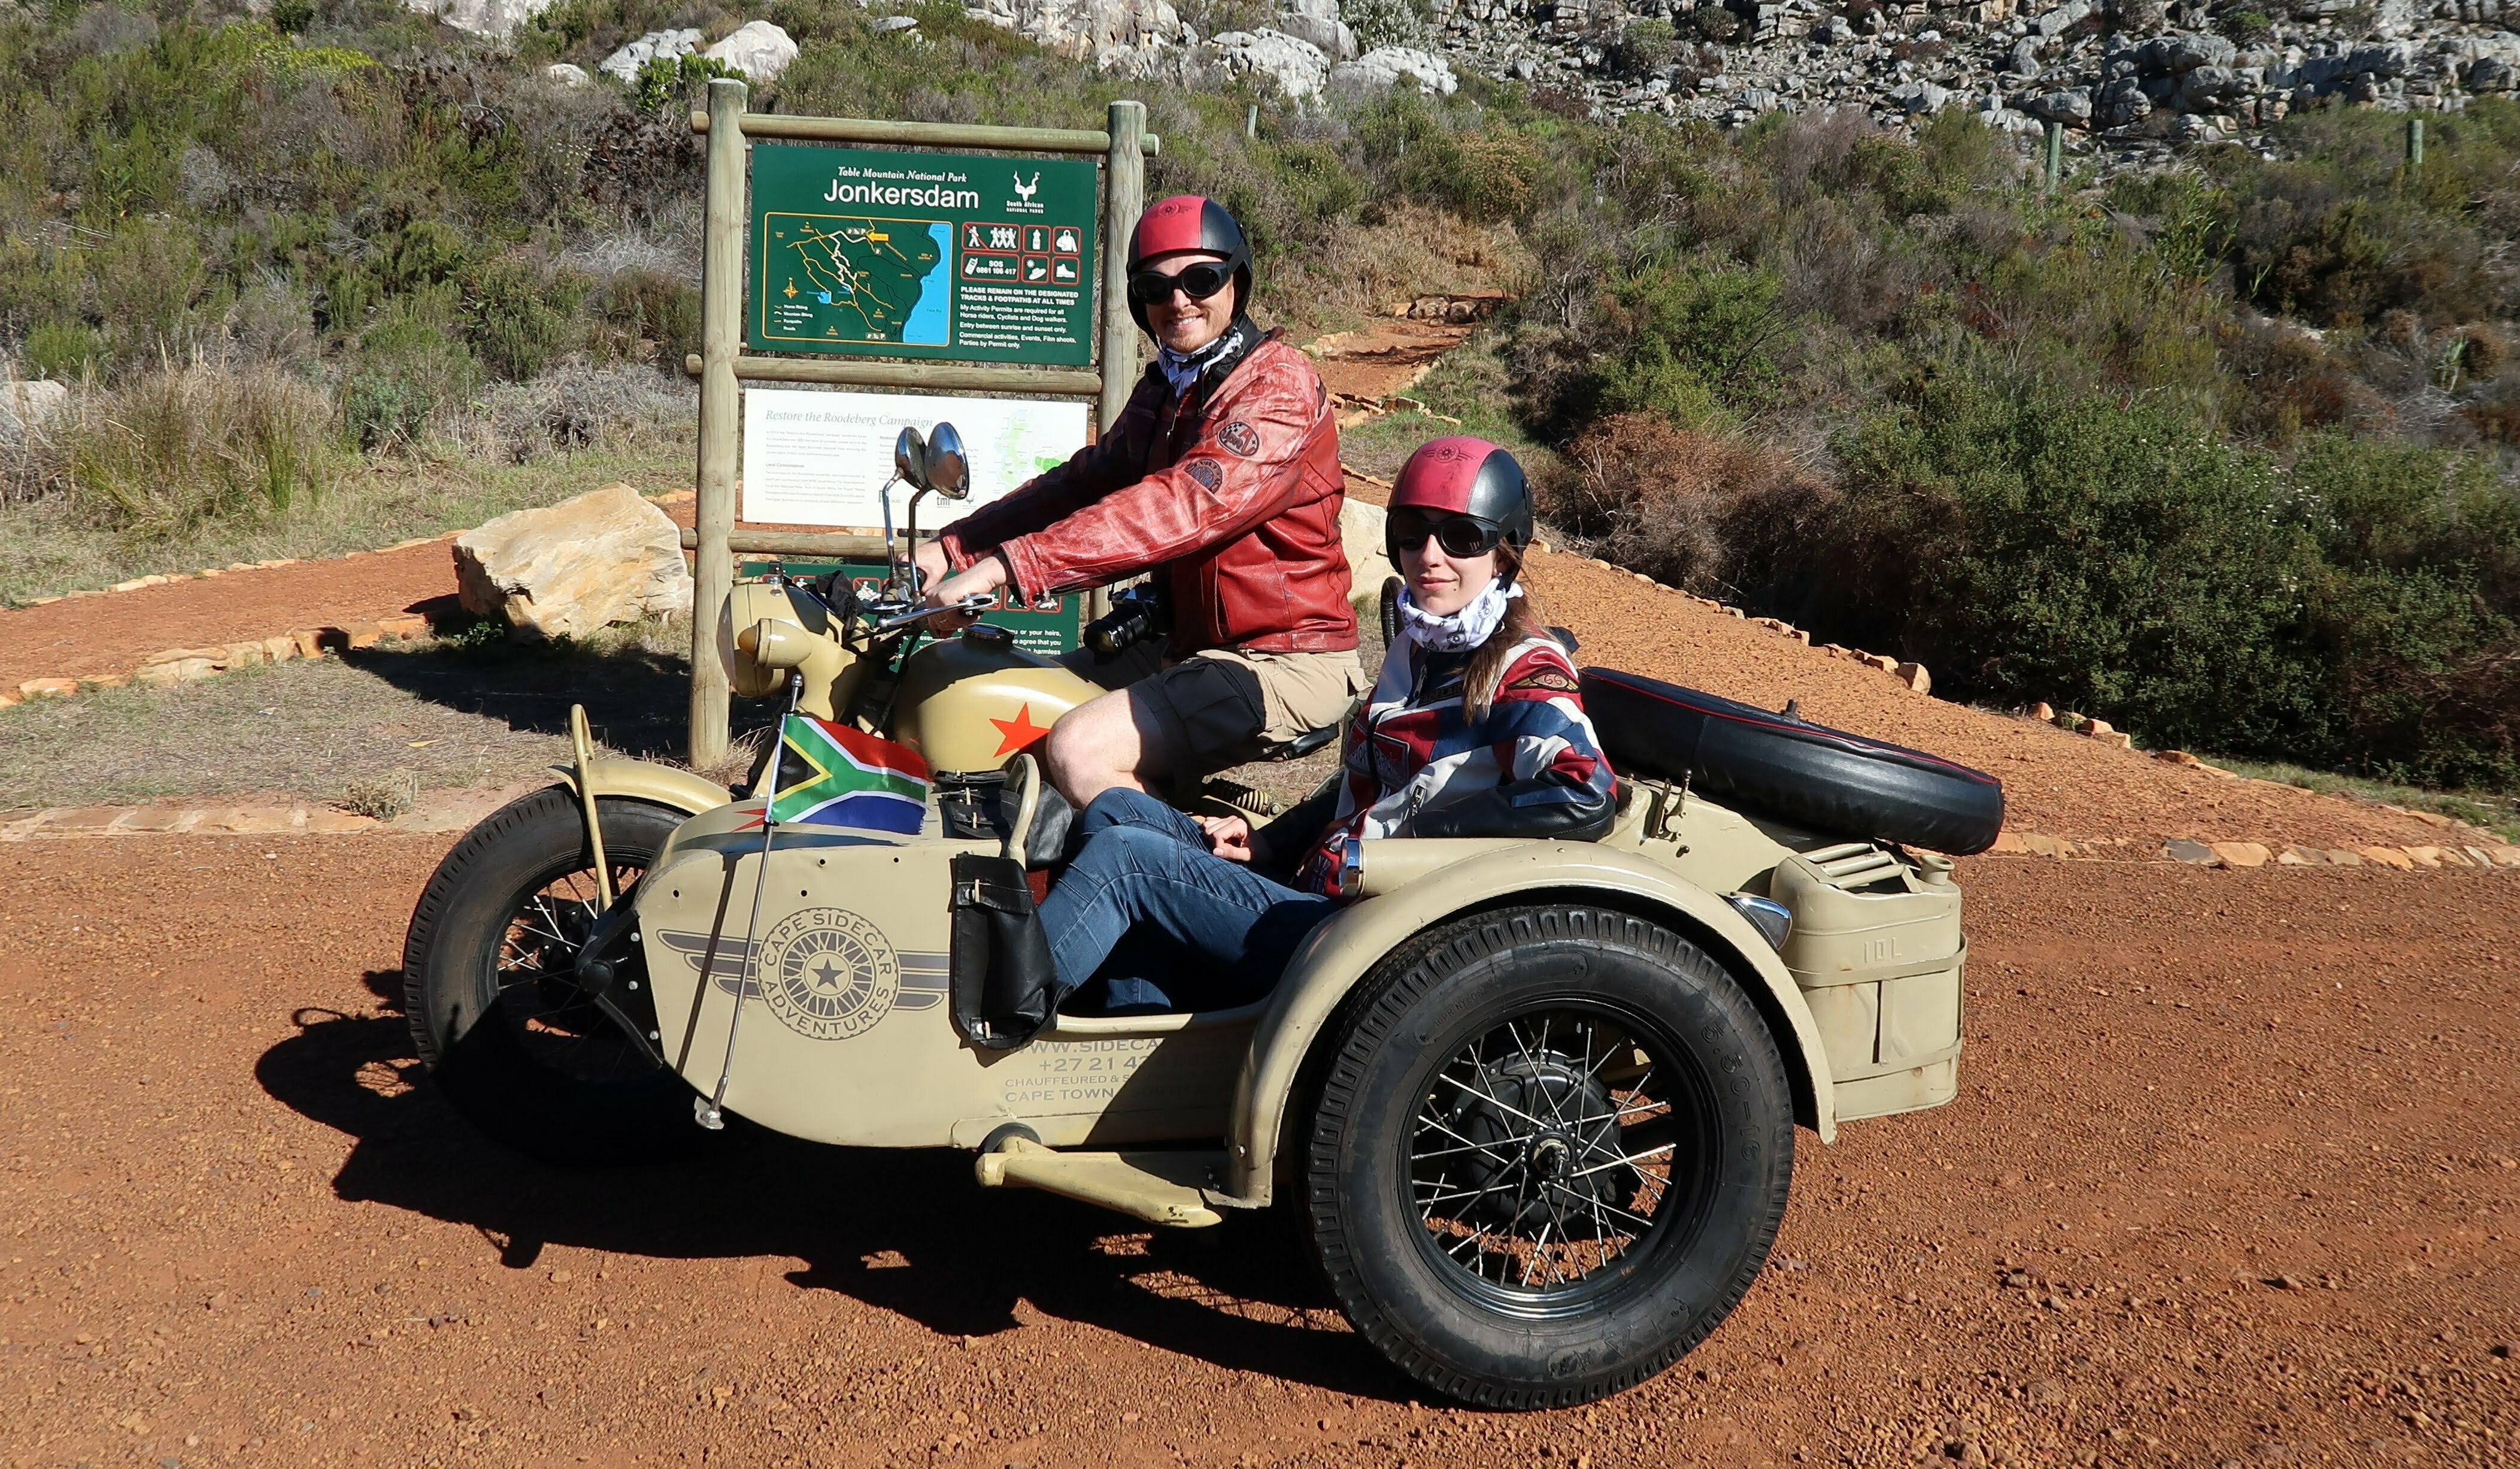 Cape Town sidecar motorcycle tour we did in South Africa on one of two visits to the country